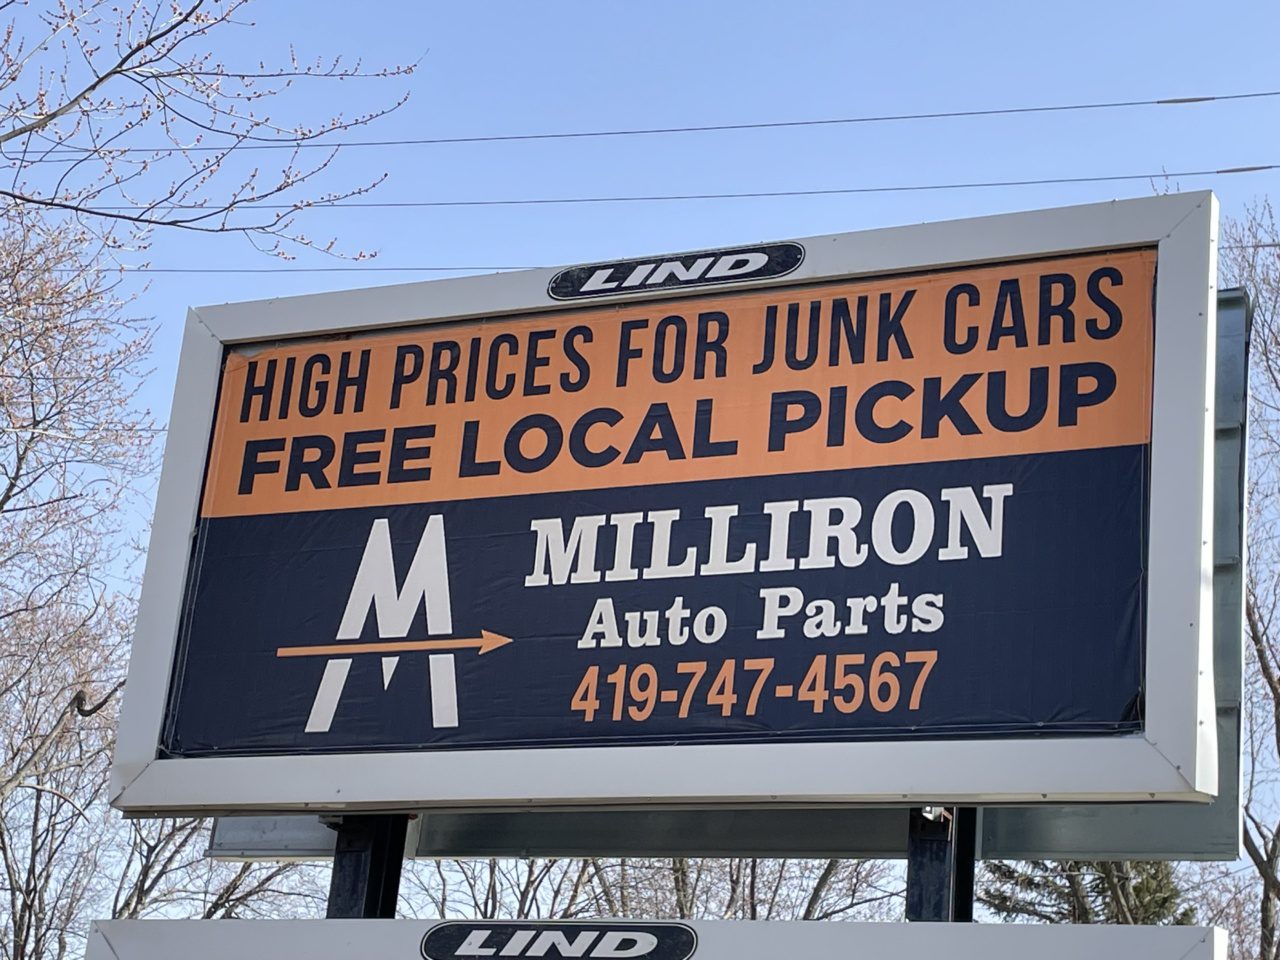 Milliron, auto parts, recycle, junk cars, free local pickup, pull and save